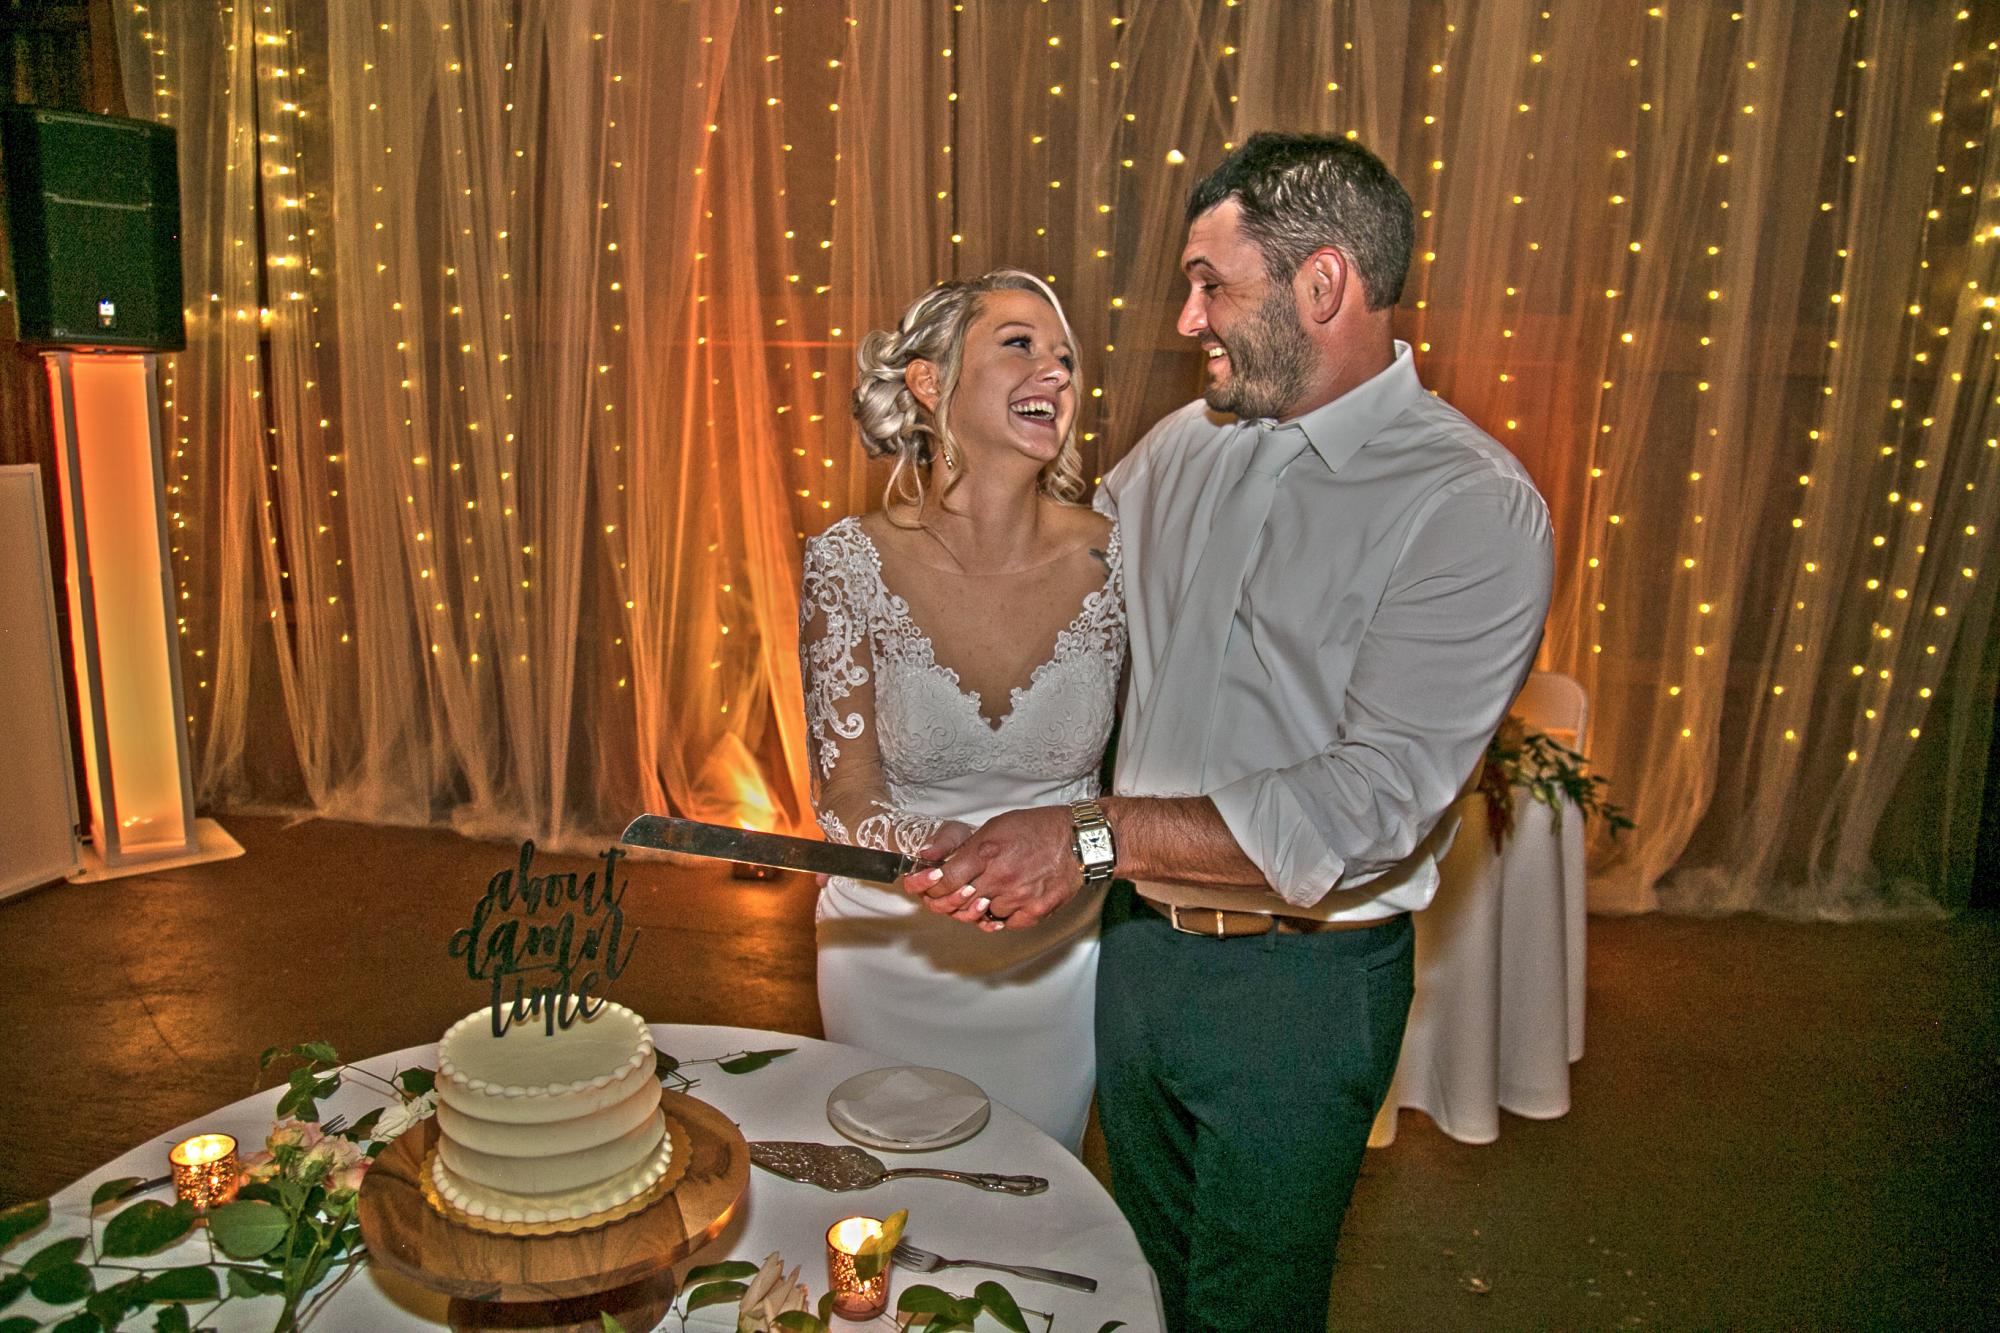 Bride and Groom cut the cake at their wedding reception.